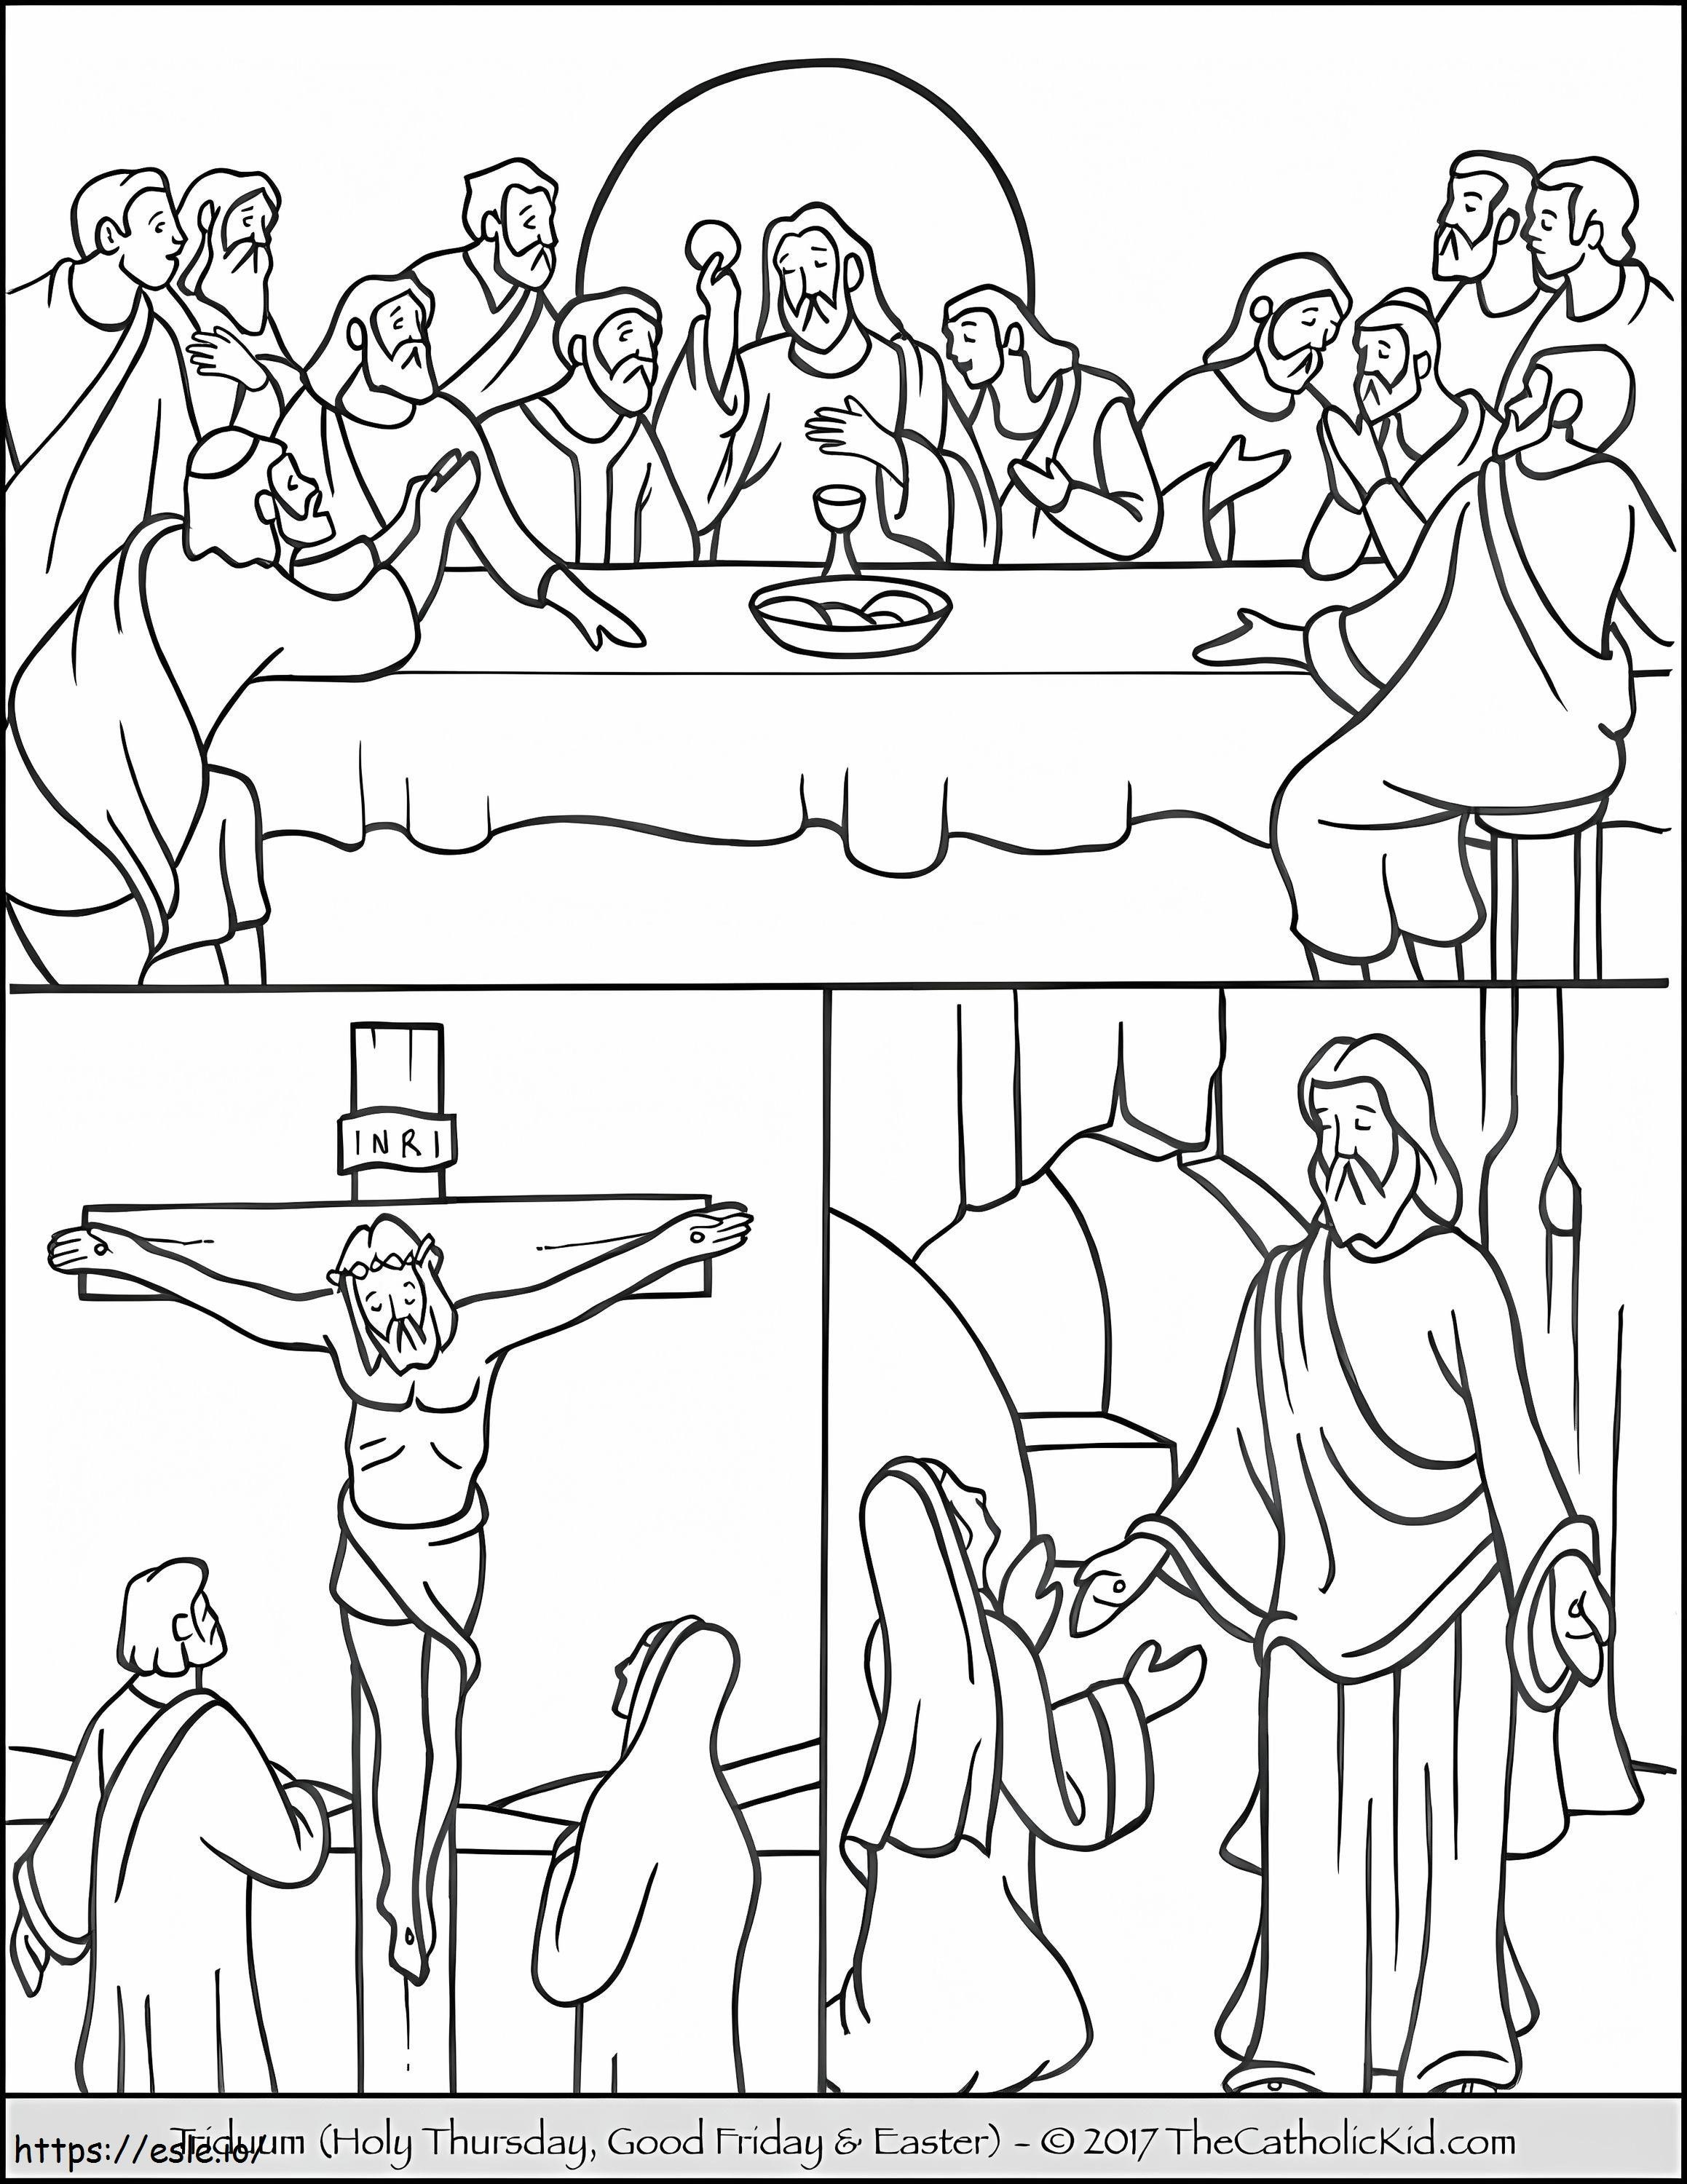 Good Friday 6 coloring page